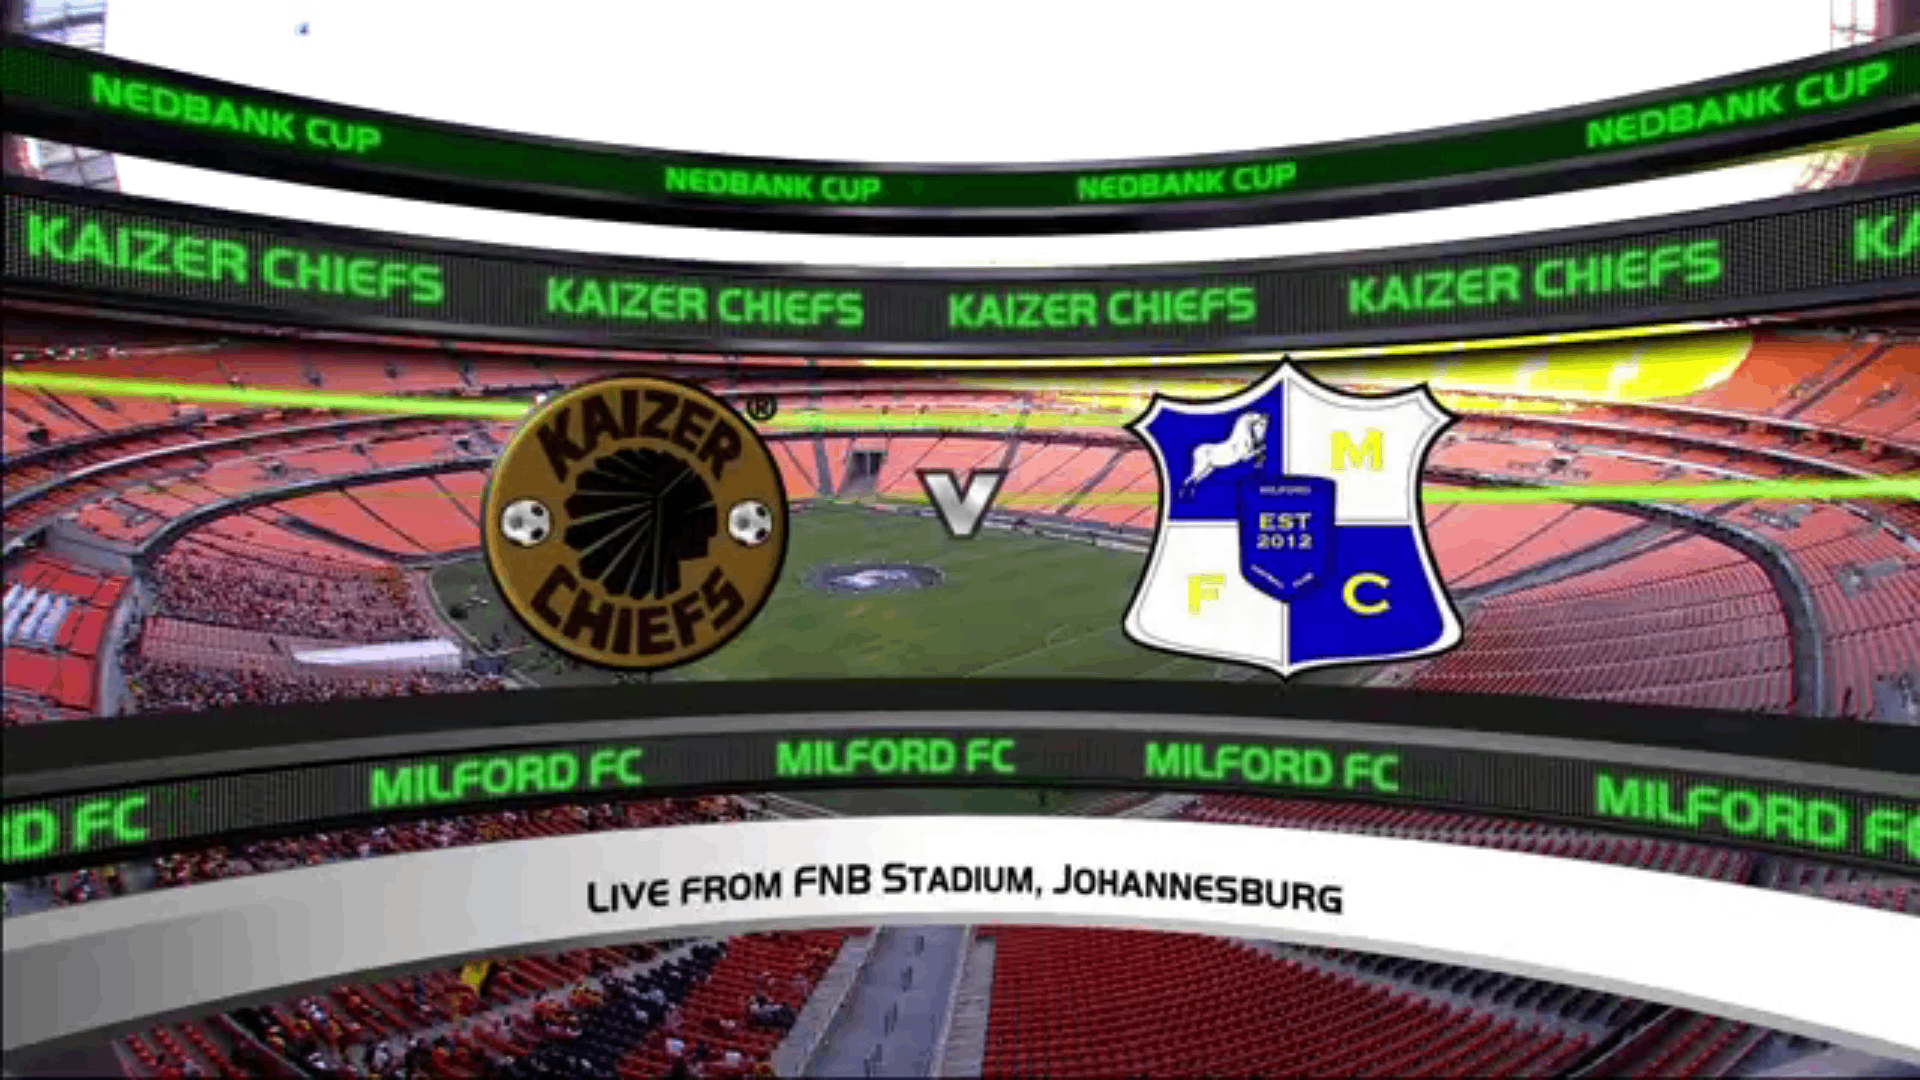 Kaizer Chiefs v Milford FC | Extended Highlights | Nedbank Cup